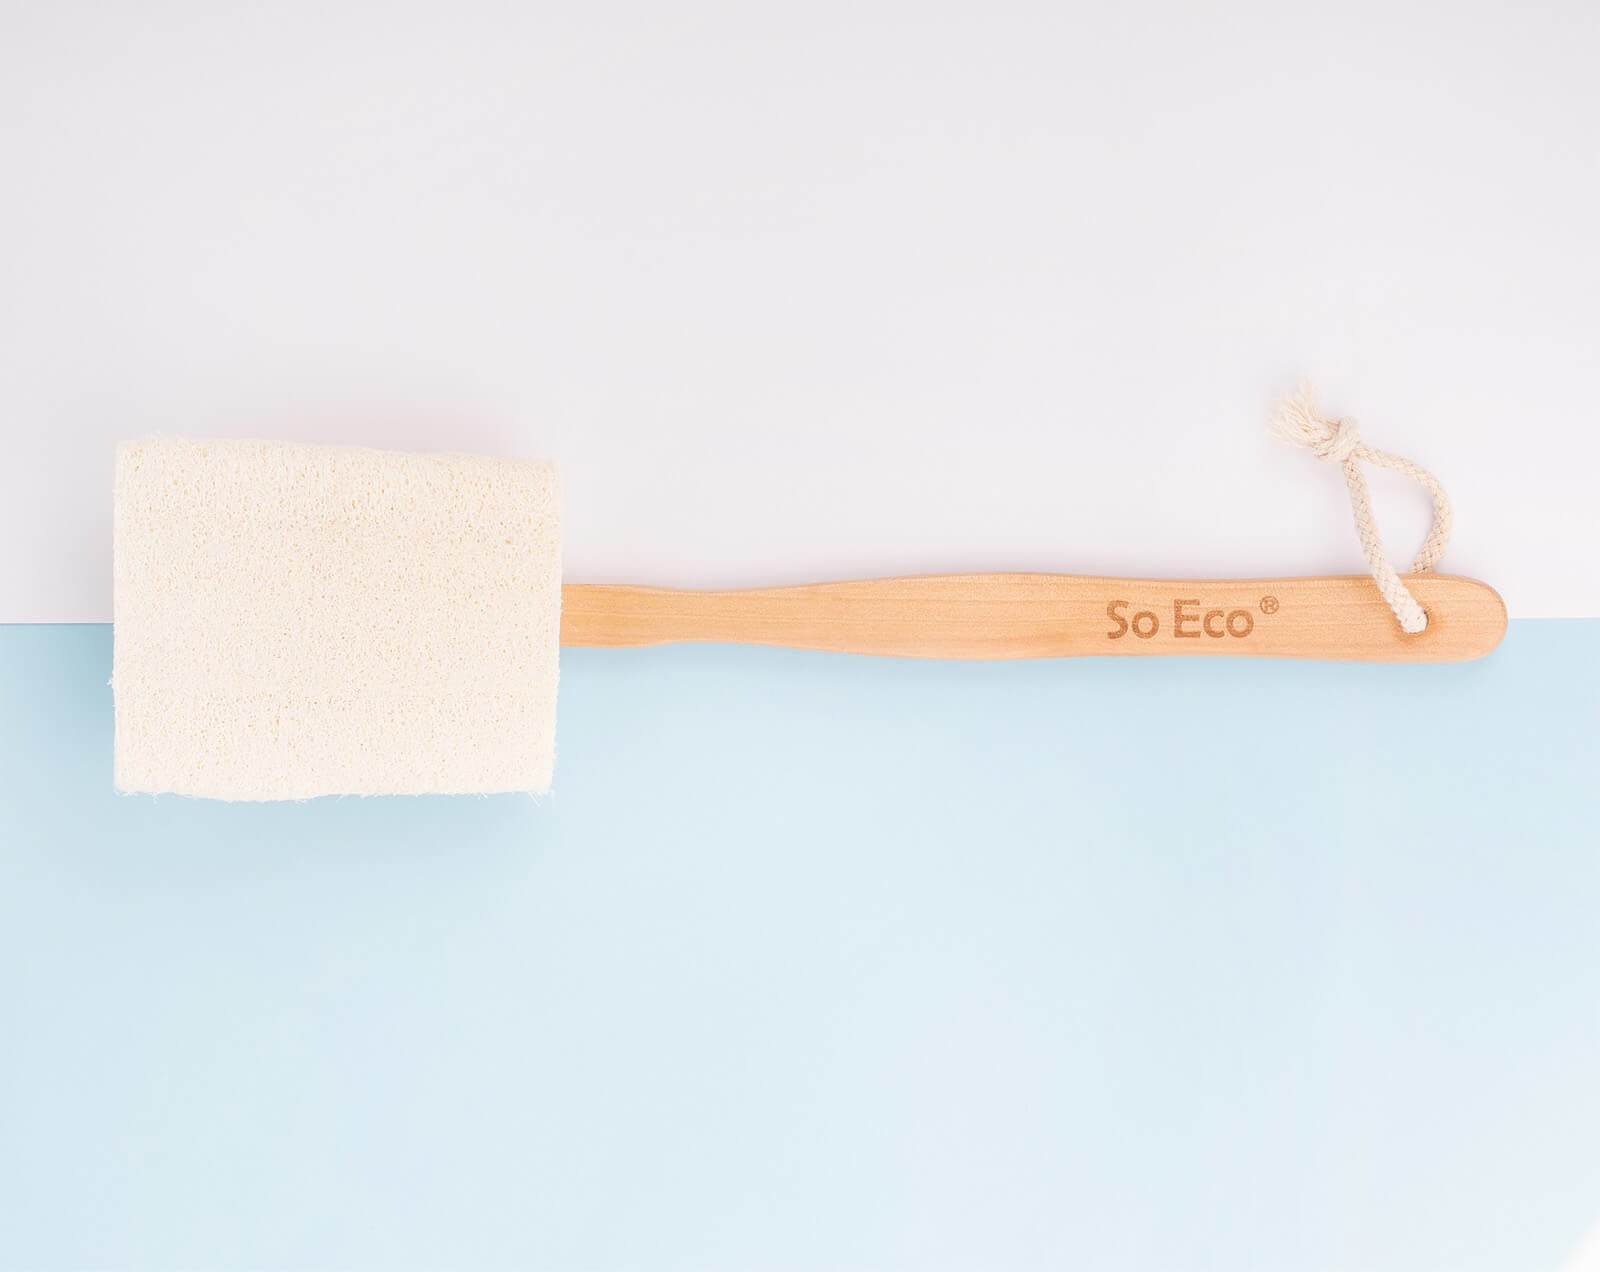 A loofah sponge attached to a long wooden handle